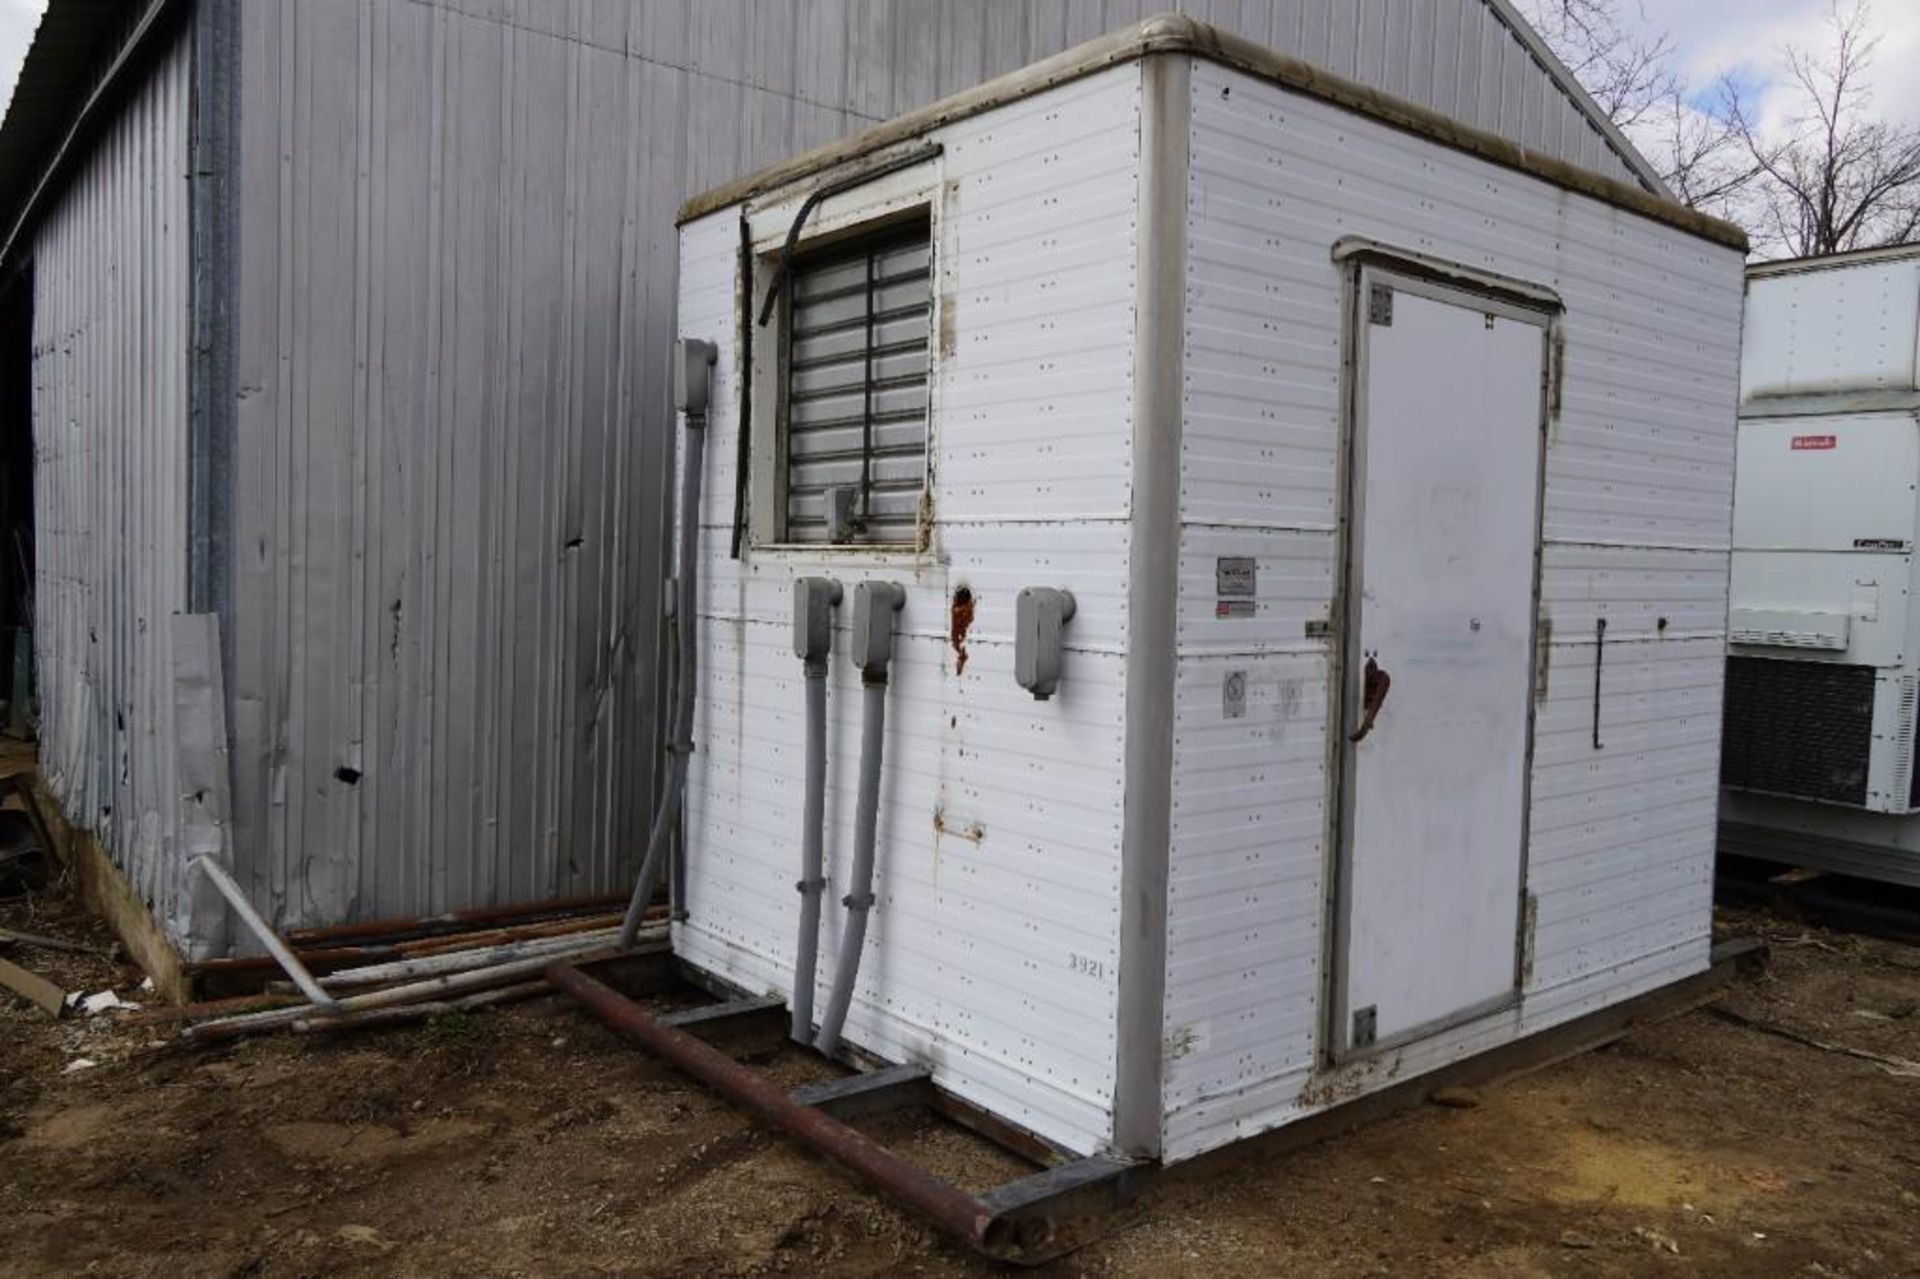 Microvan Mobile International Insulated Aluminum Mobile Building - Image 3 of 16